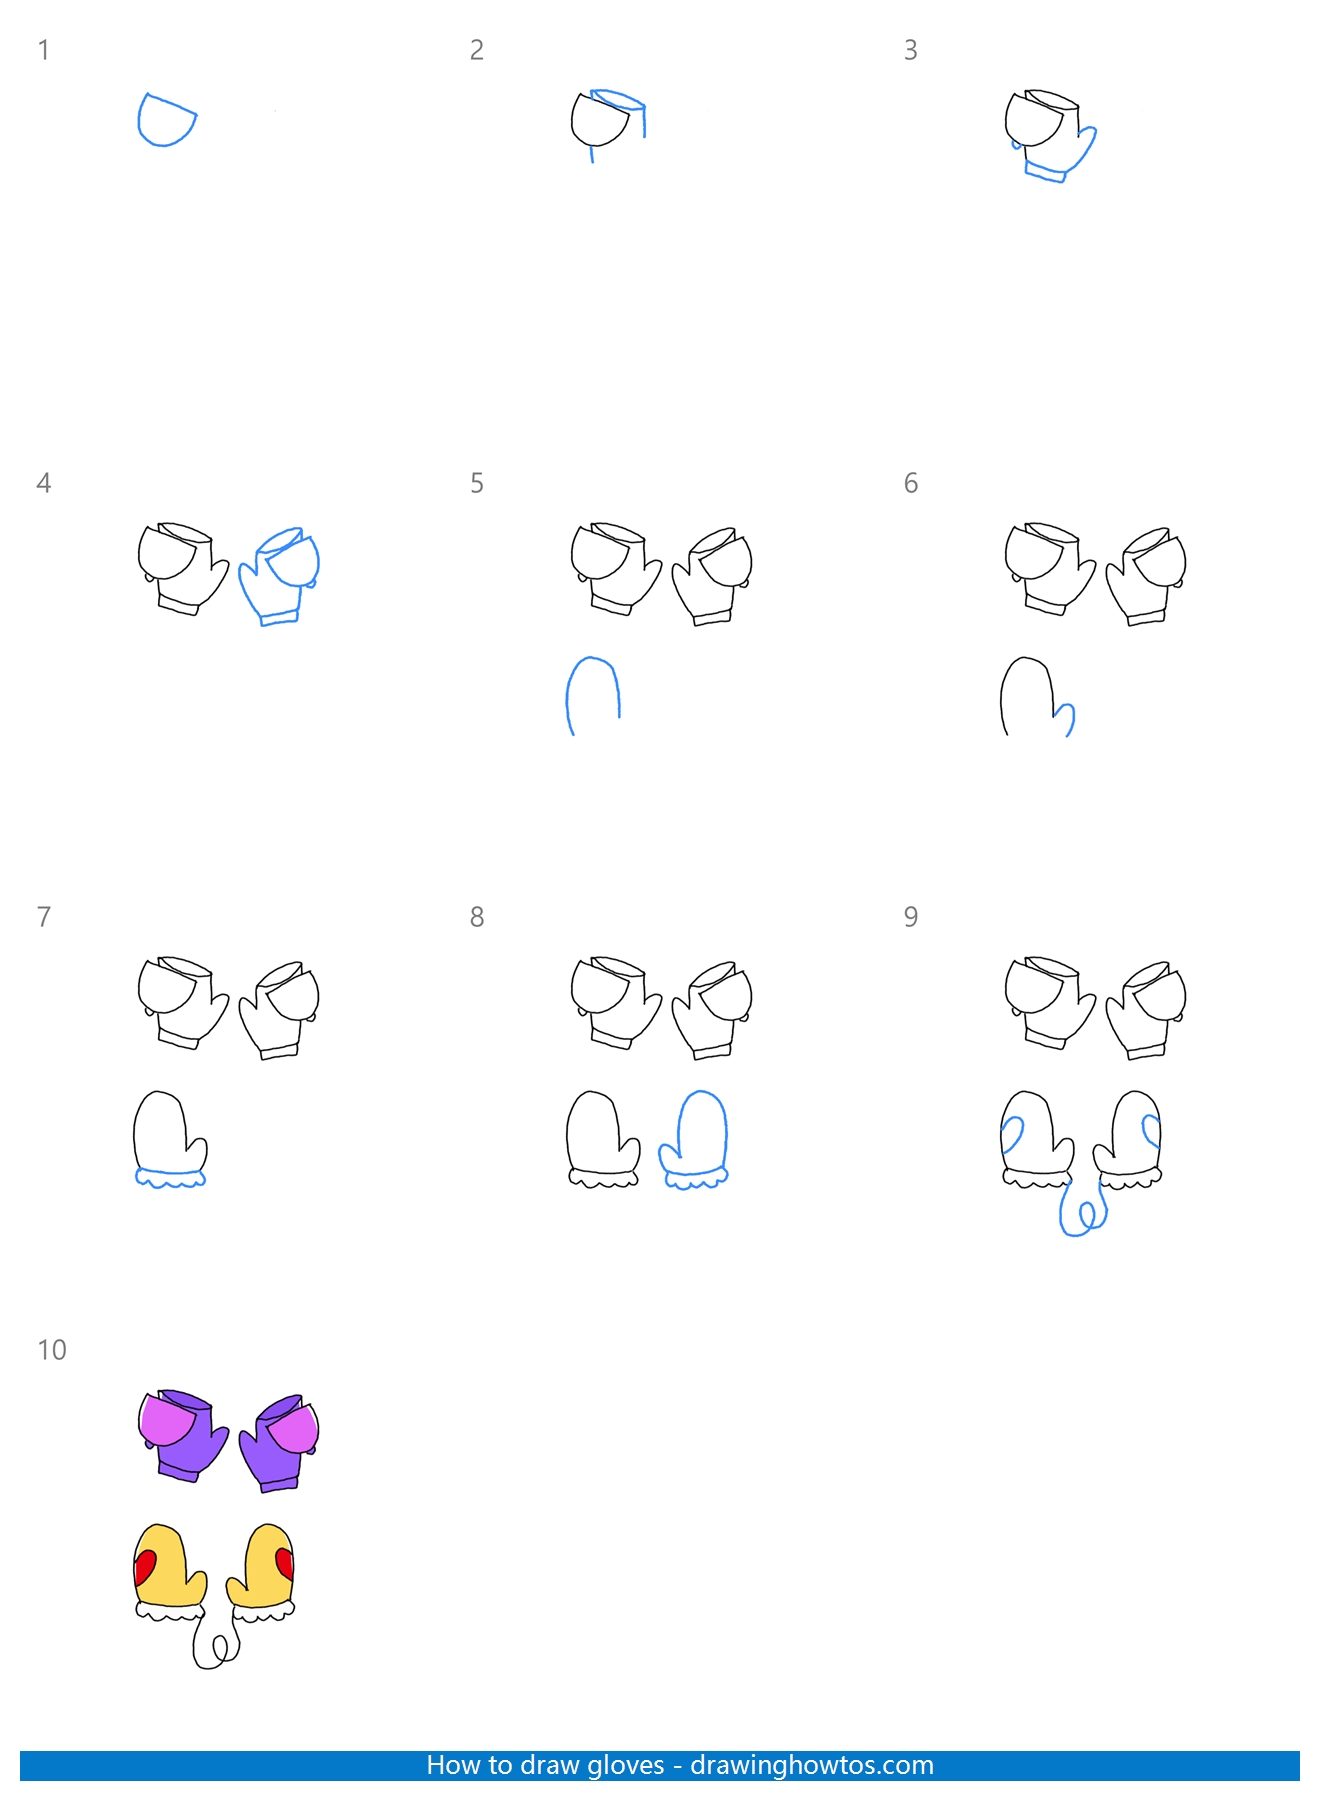 How to Draw Gloves Step by Step